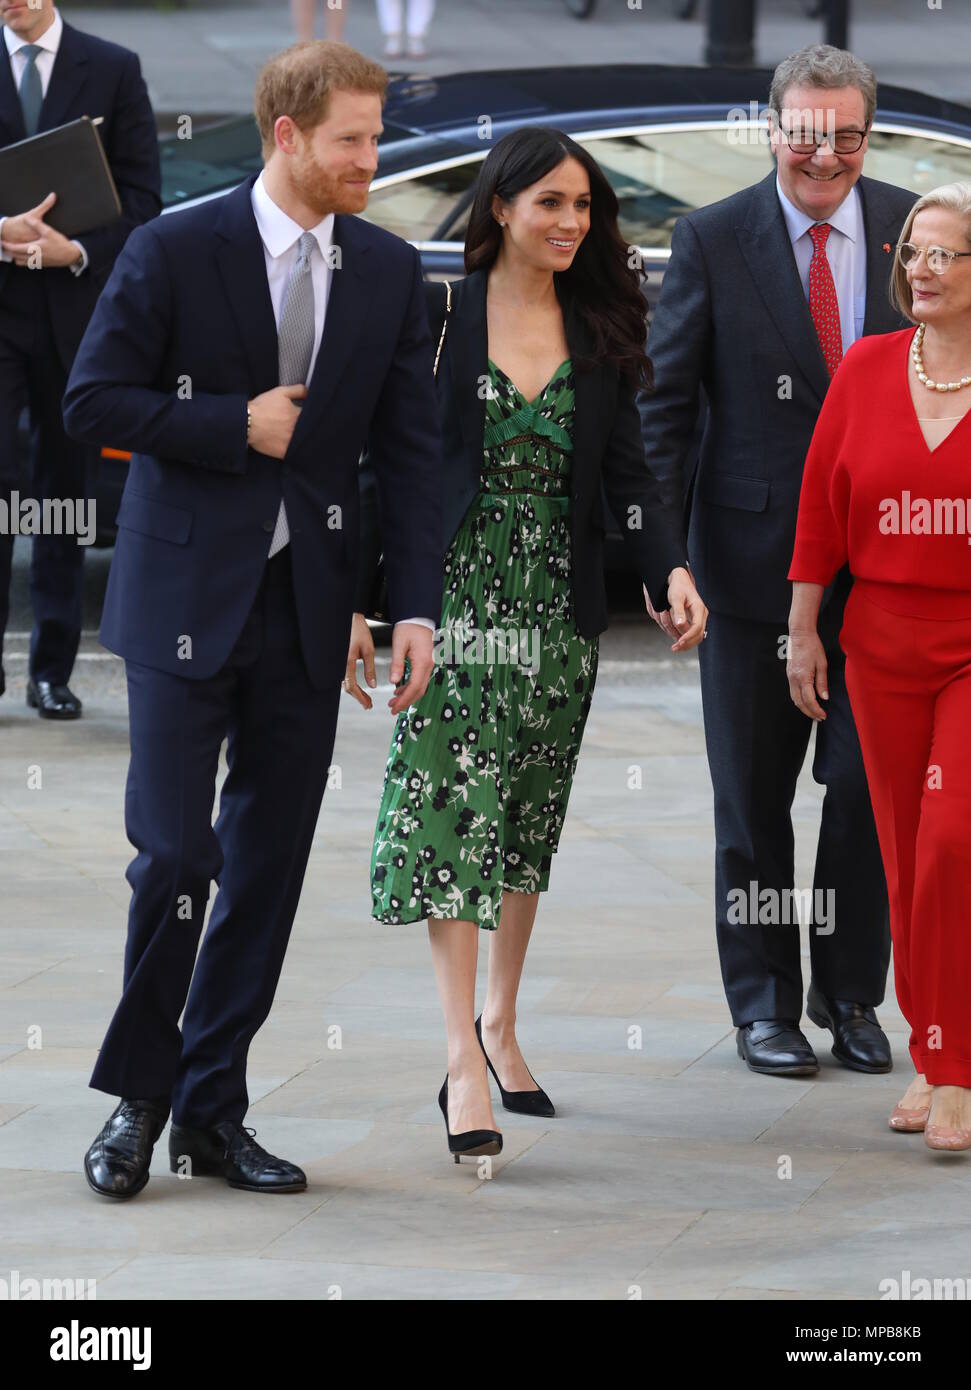 Prince Harry and Meghan Markle arrive at Australia House in London to meet with the Australian High Commissioner in the lead up to Invictus Games.  Featuring: Prince Harry, Meghan Markle, Lucy Turnbull, Australian High Commissioner Alexander Downer Where: London, United Kingdom When: 21 Apr 2018 Credit: David Sims/WENN.com Stock Photo